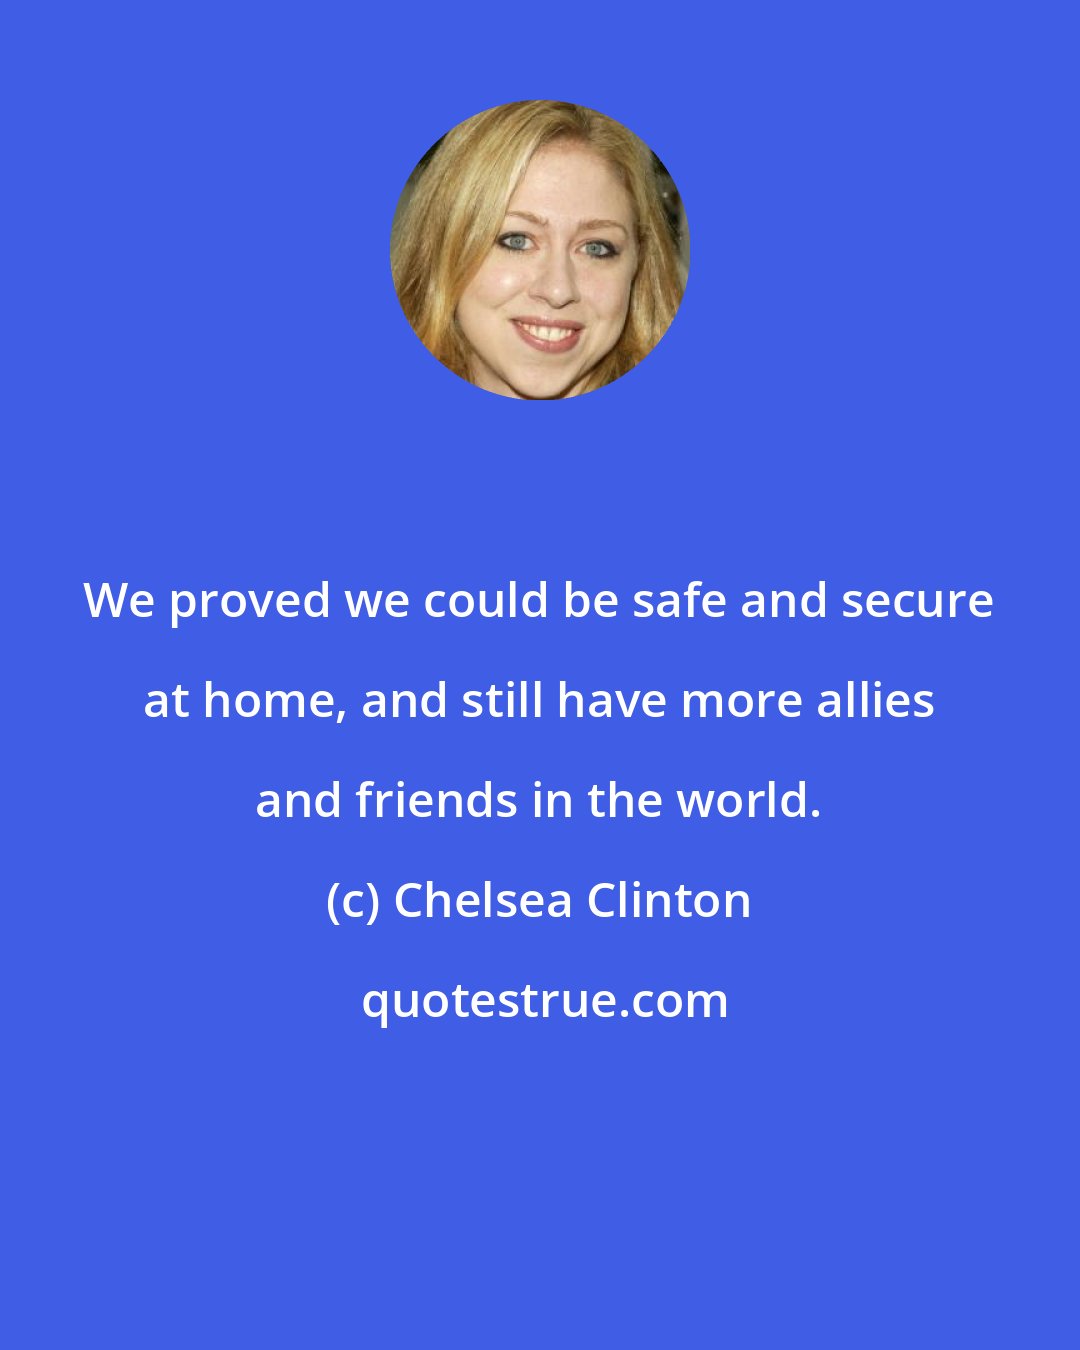 Chelsea Clinton: We proved we could be safe and secure at home, and still have more allies and friends in the world.